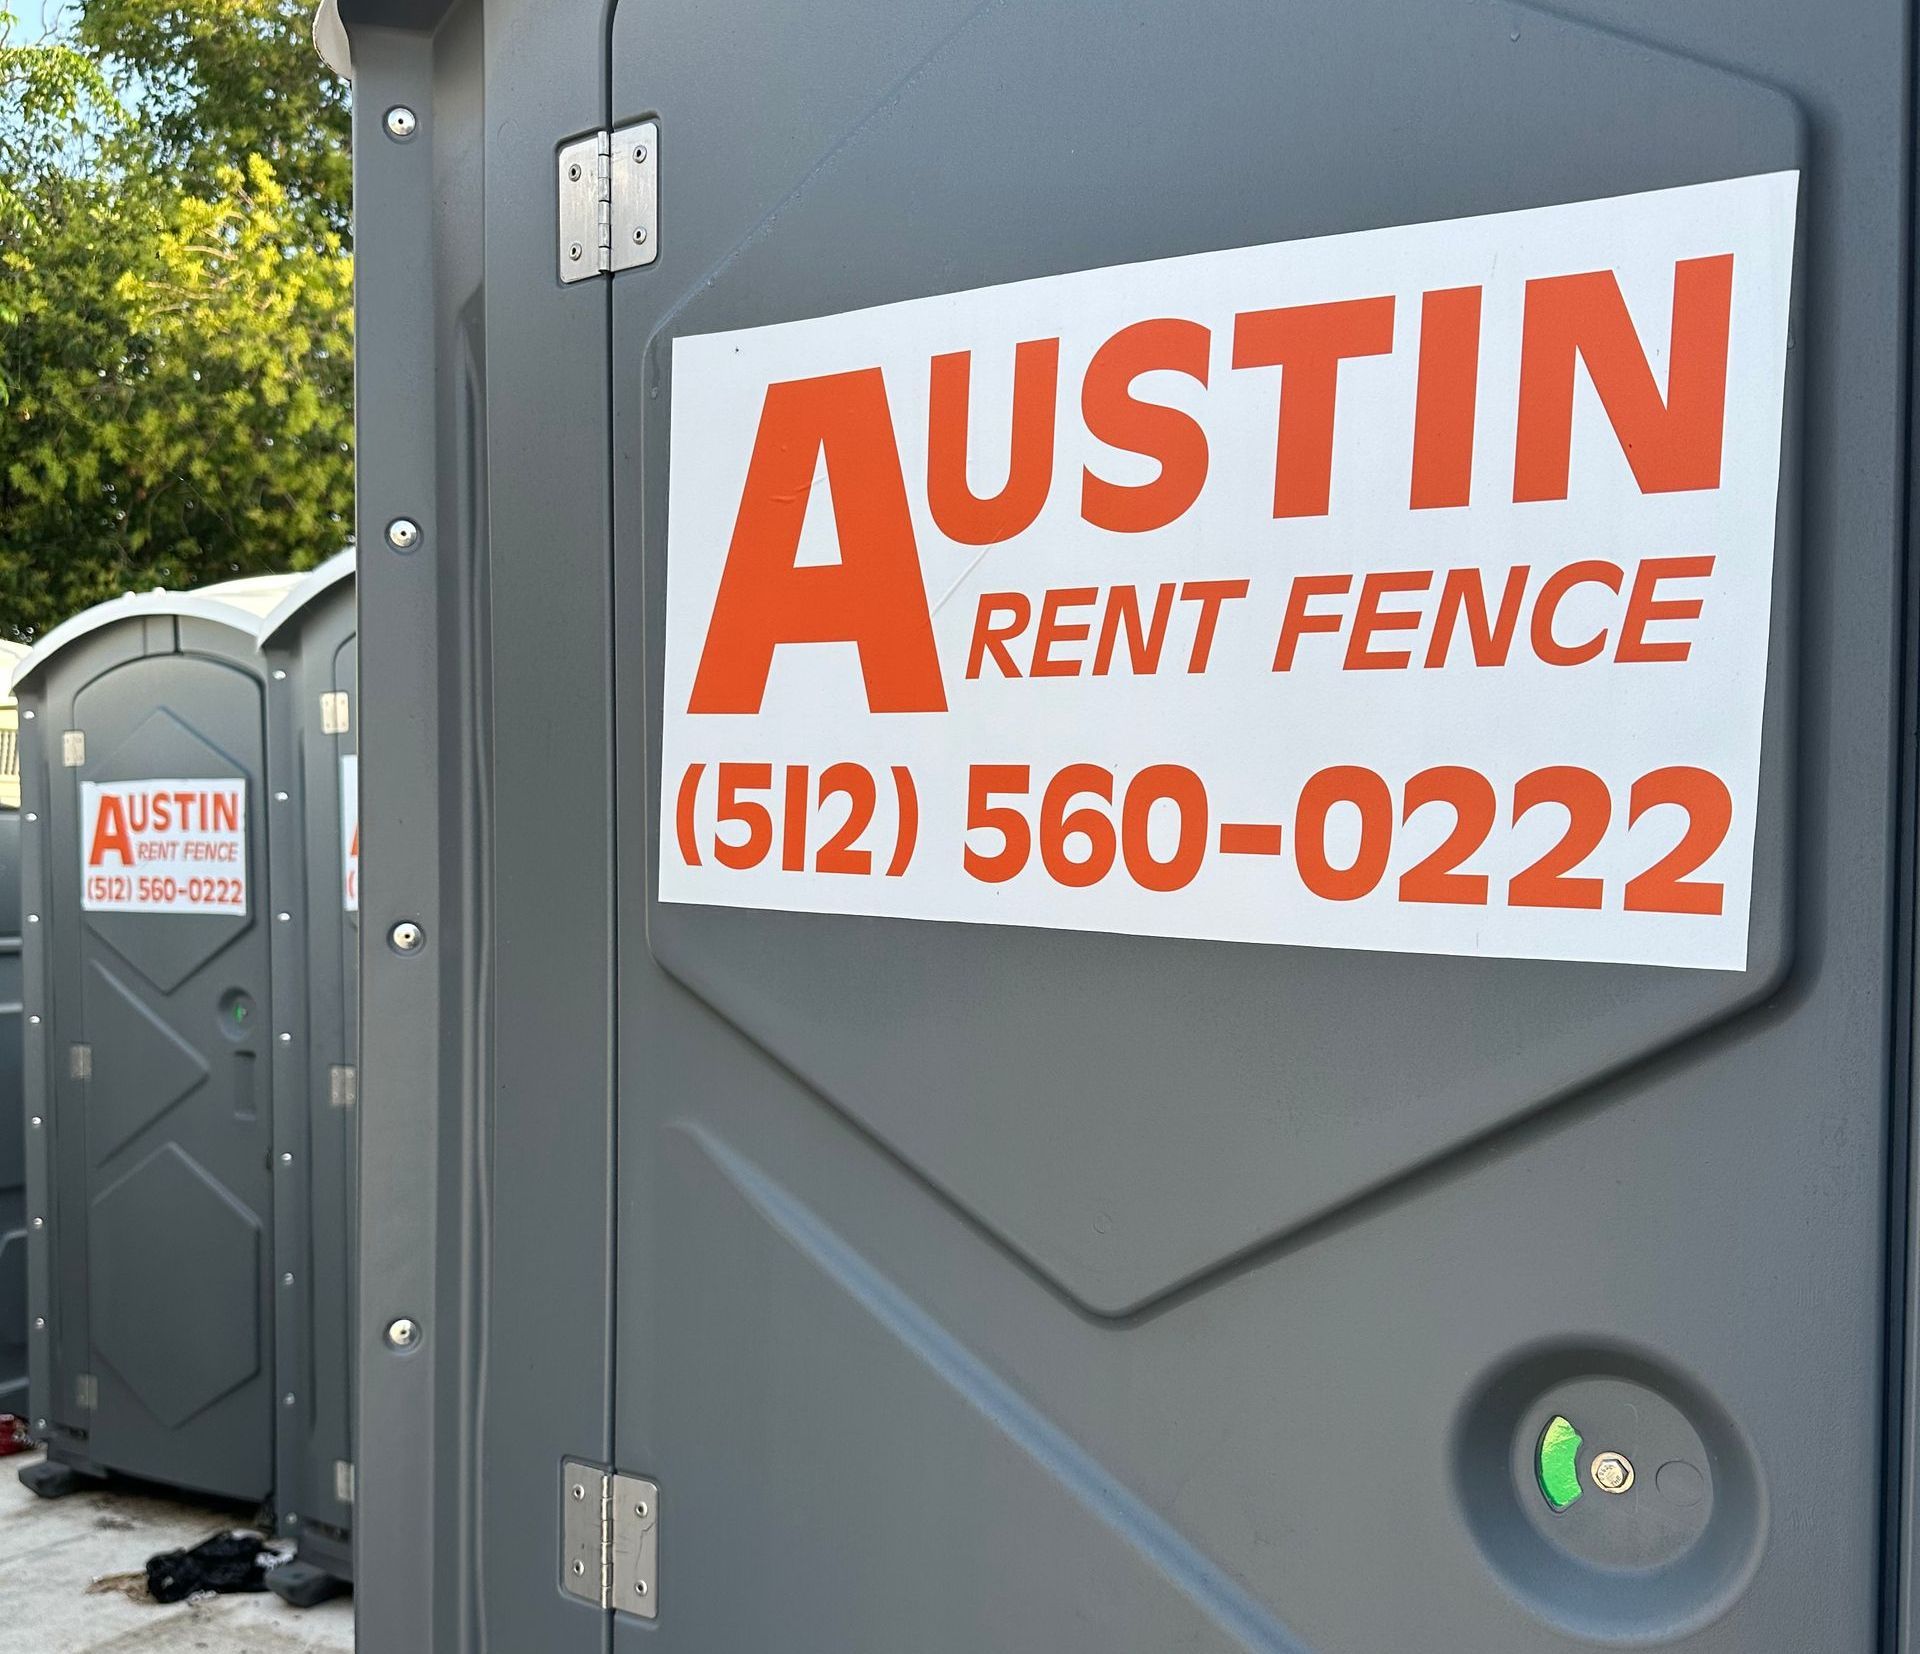 A sign for austin rent fence is on a portable toilet